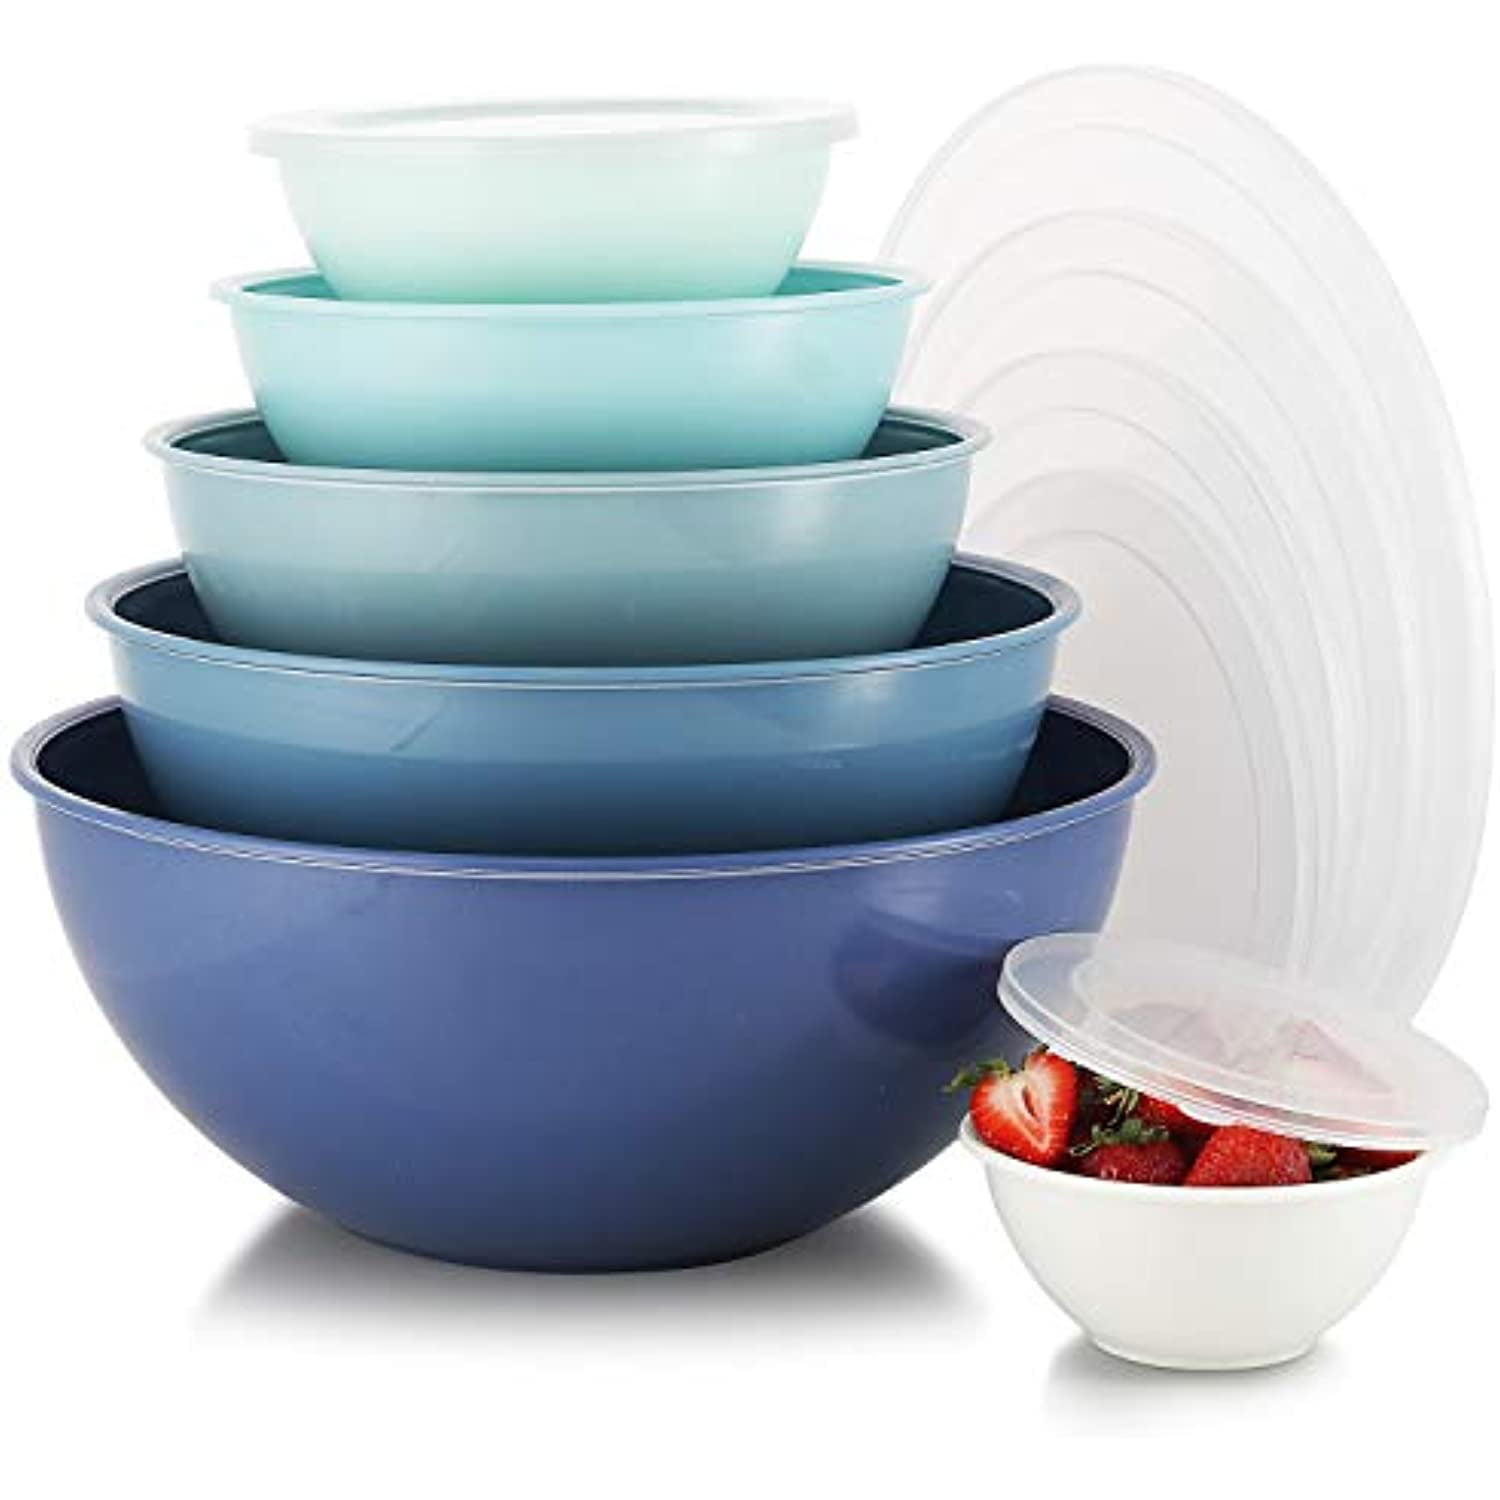 GLAD Mixing Bowls with Pour Spout, Set of 3, Nesting Design Saves Space, Non-Slip, BPA Free, Dishwasher Safe Plastic, Kitchen Cooking and Baking  Supplies, Wh…